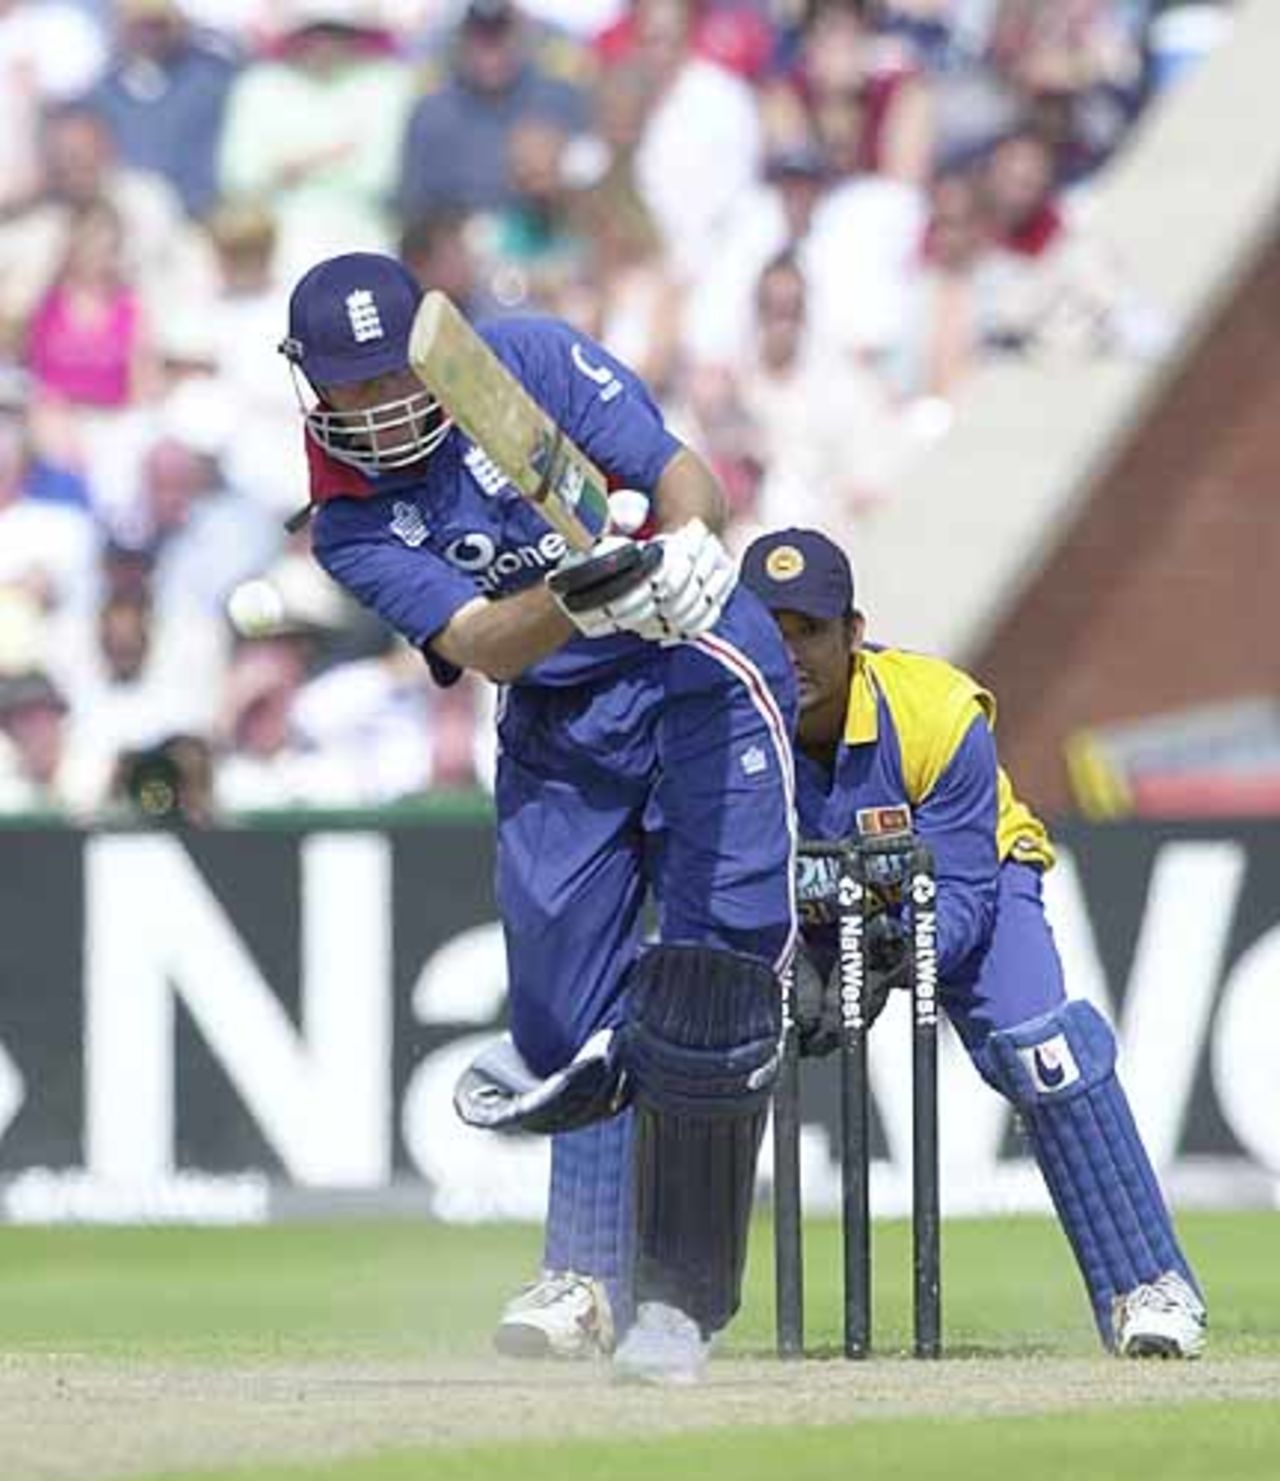 Vaughan mis-times this Chandana delivery back in to the hands of the bowler, England v Sri Lanka at Manchester, July 2002